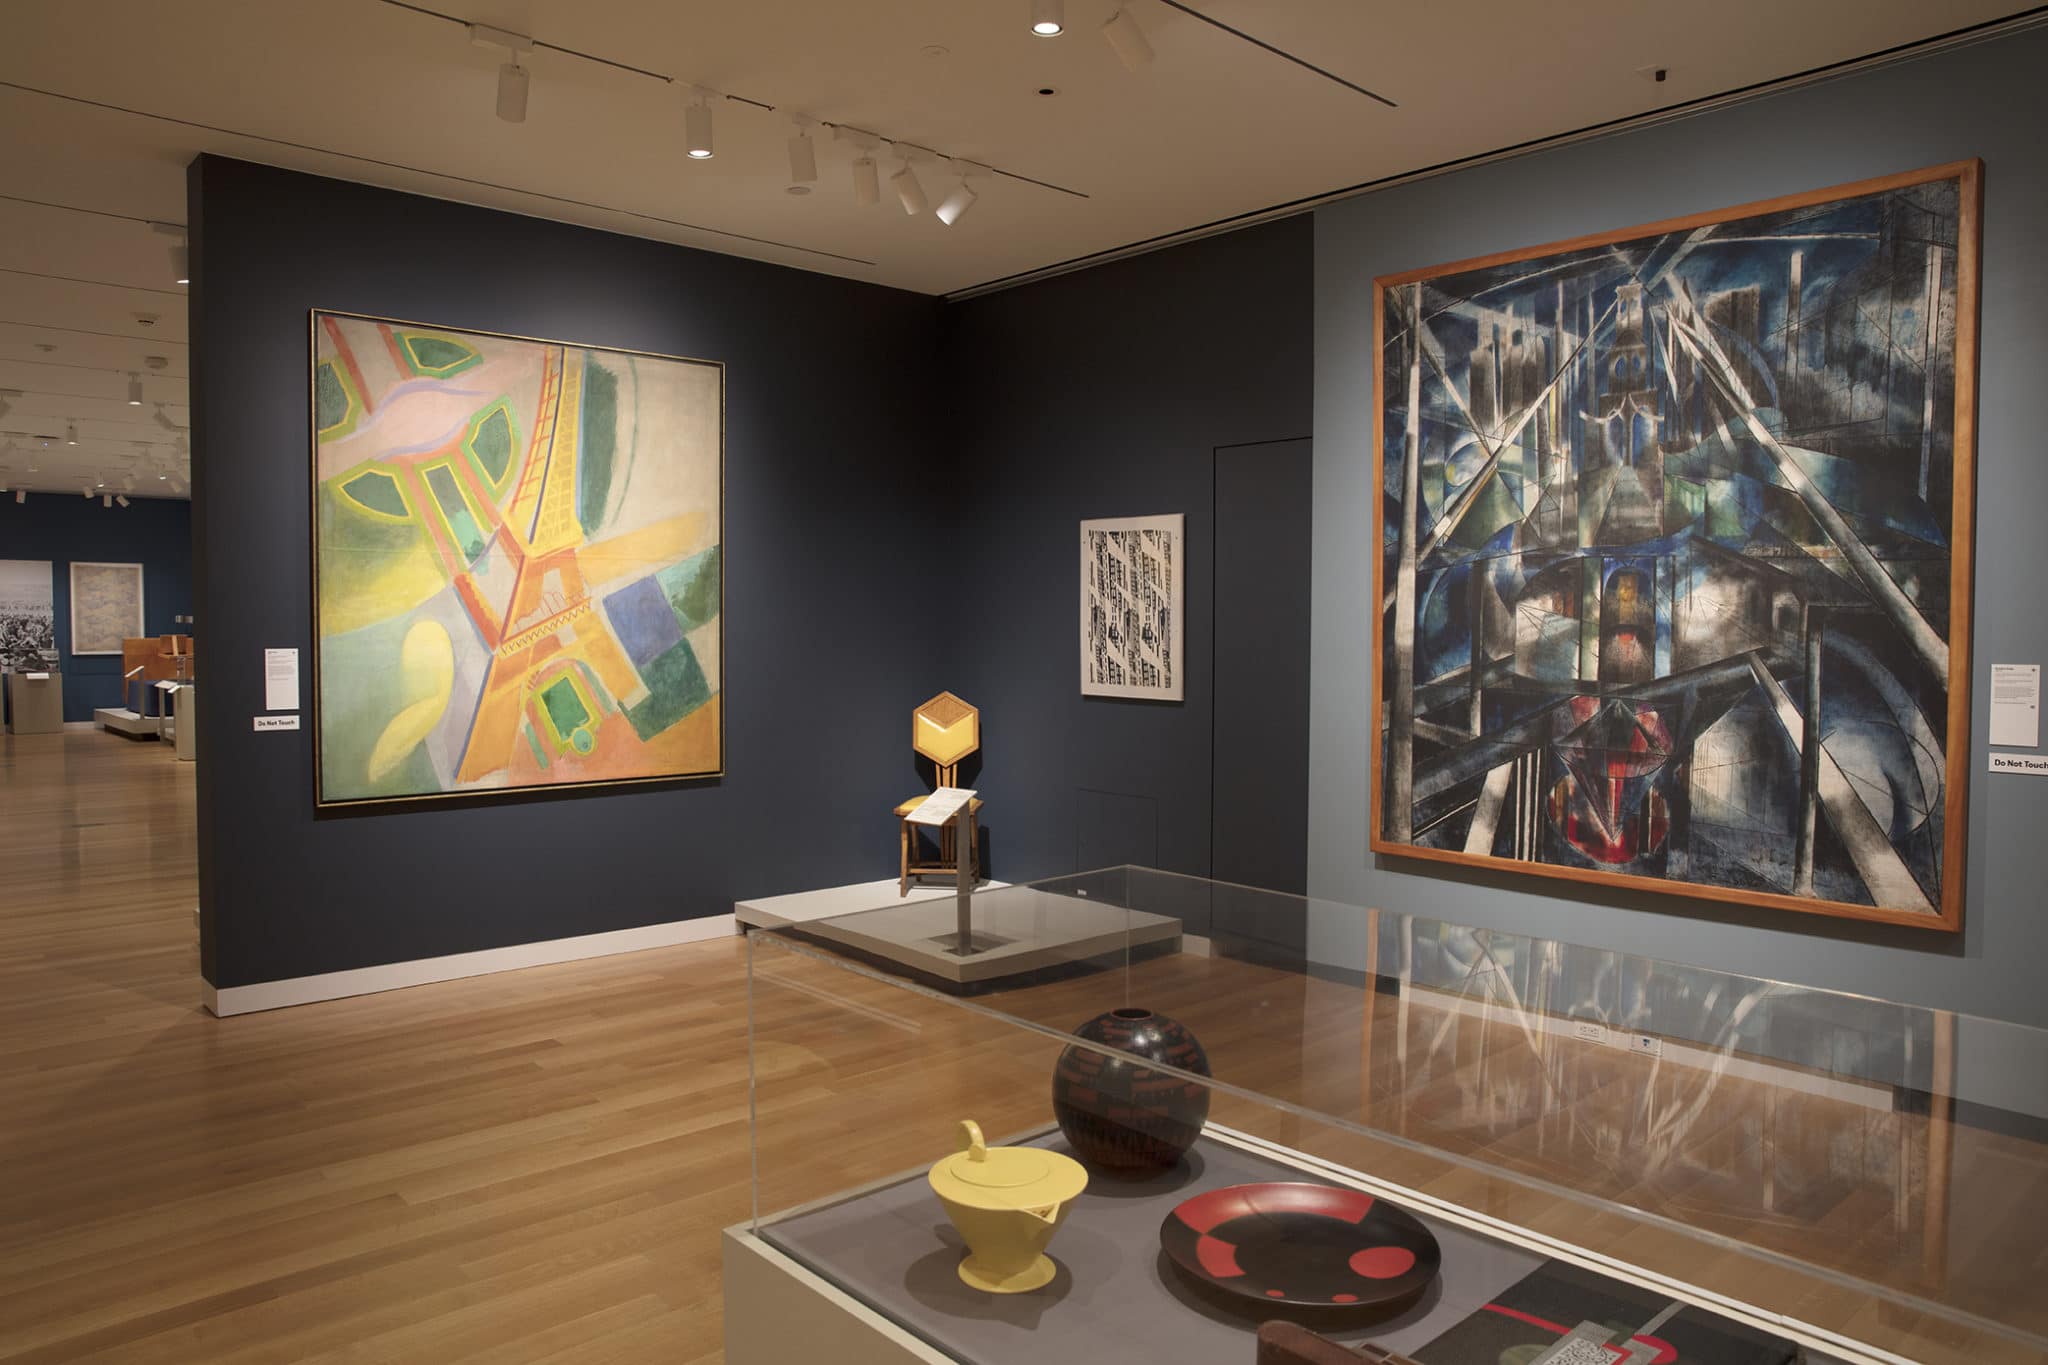 COOPER HEWITT, SMITHSONIAN DESIGN MUSEUM TO DEBUT “THE JAZZ AGE: AMERICAN  STYLE IN THE 1920S”